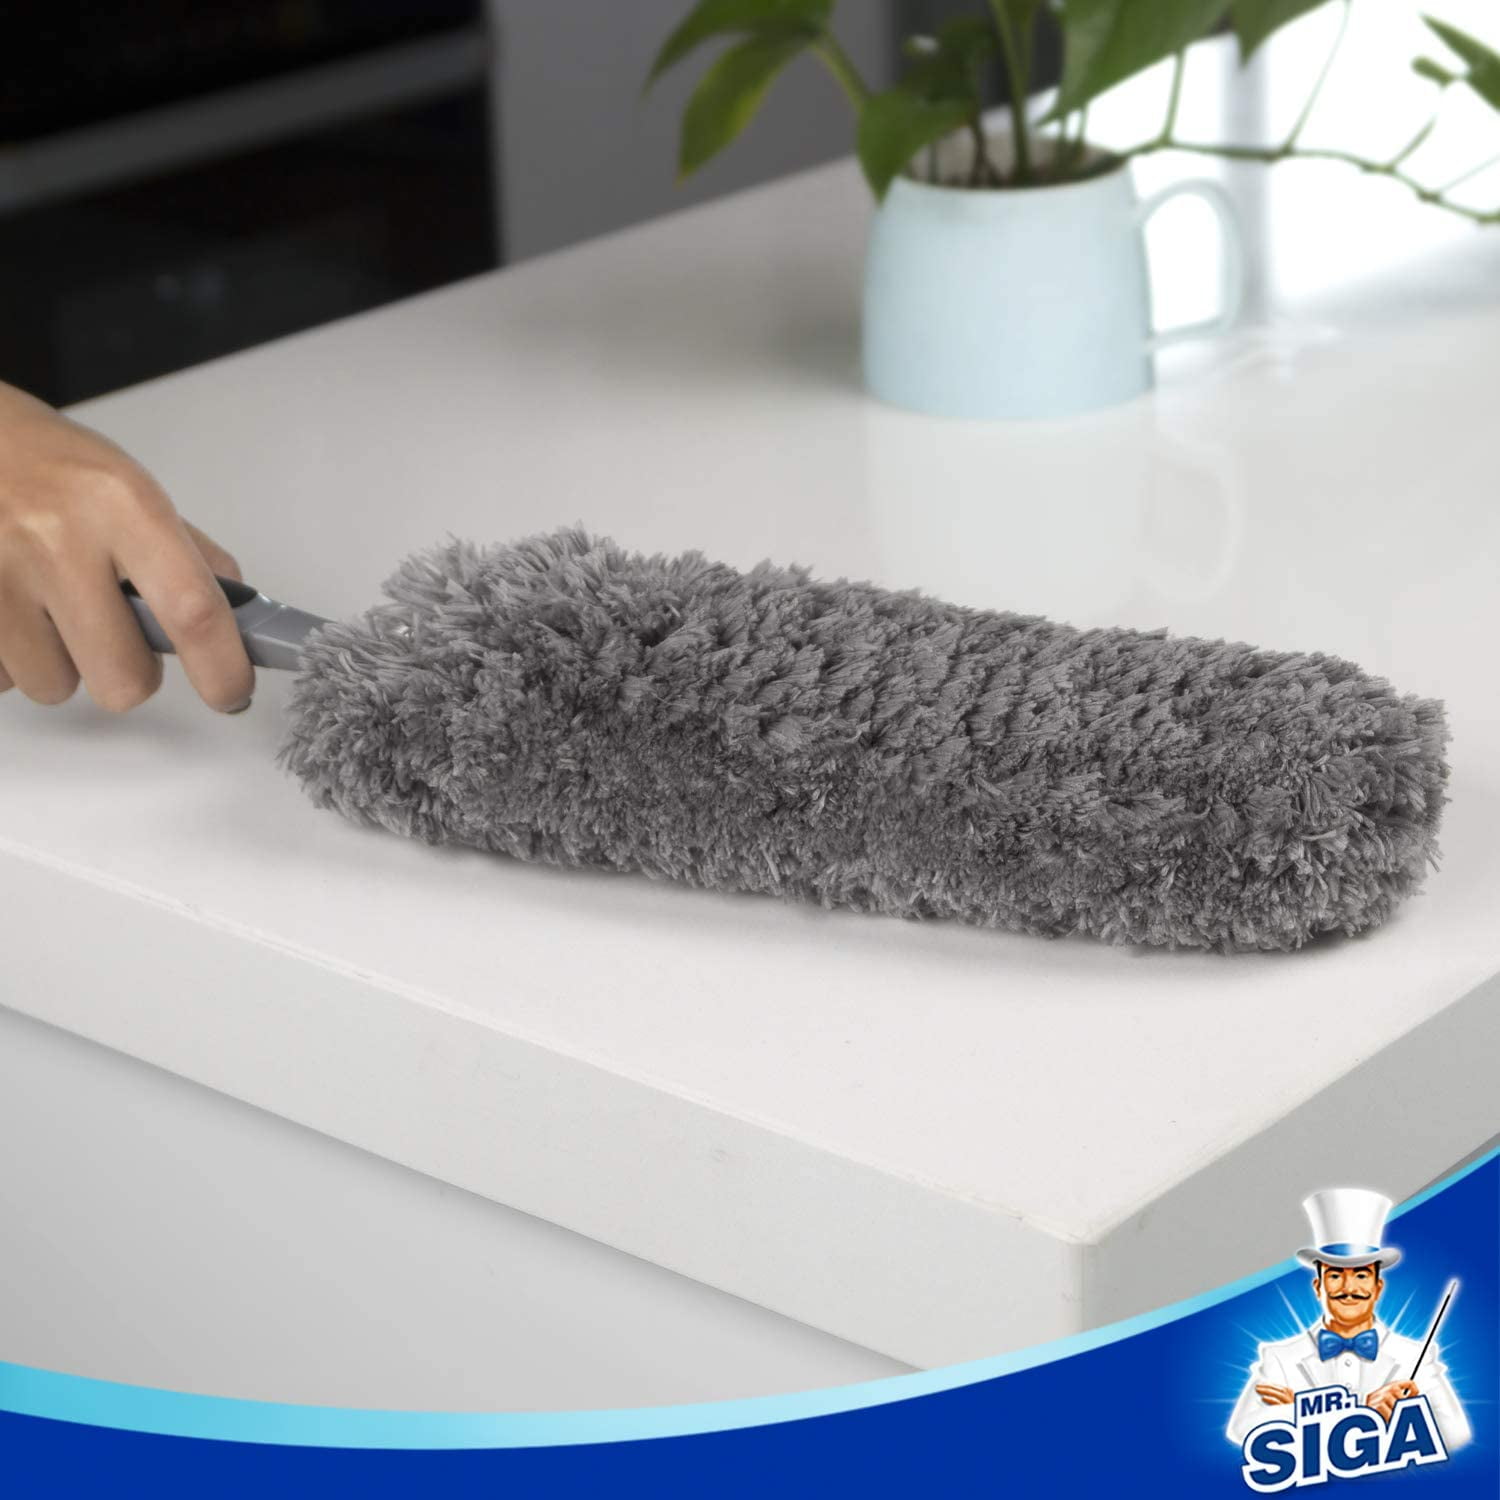 Tackle annoying dust around your home with ease with our Microfiber Duster.  The delicate microfiber strands trap and hold dust without the…